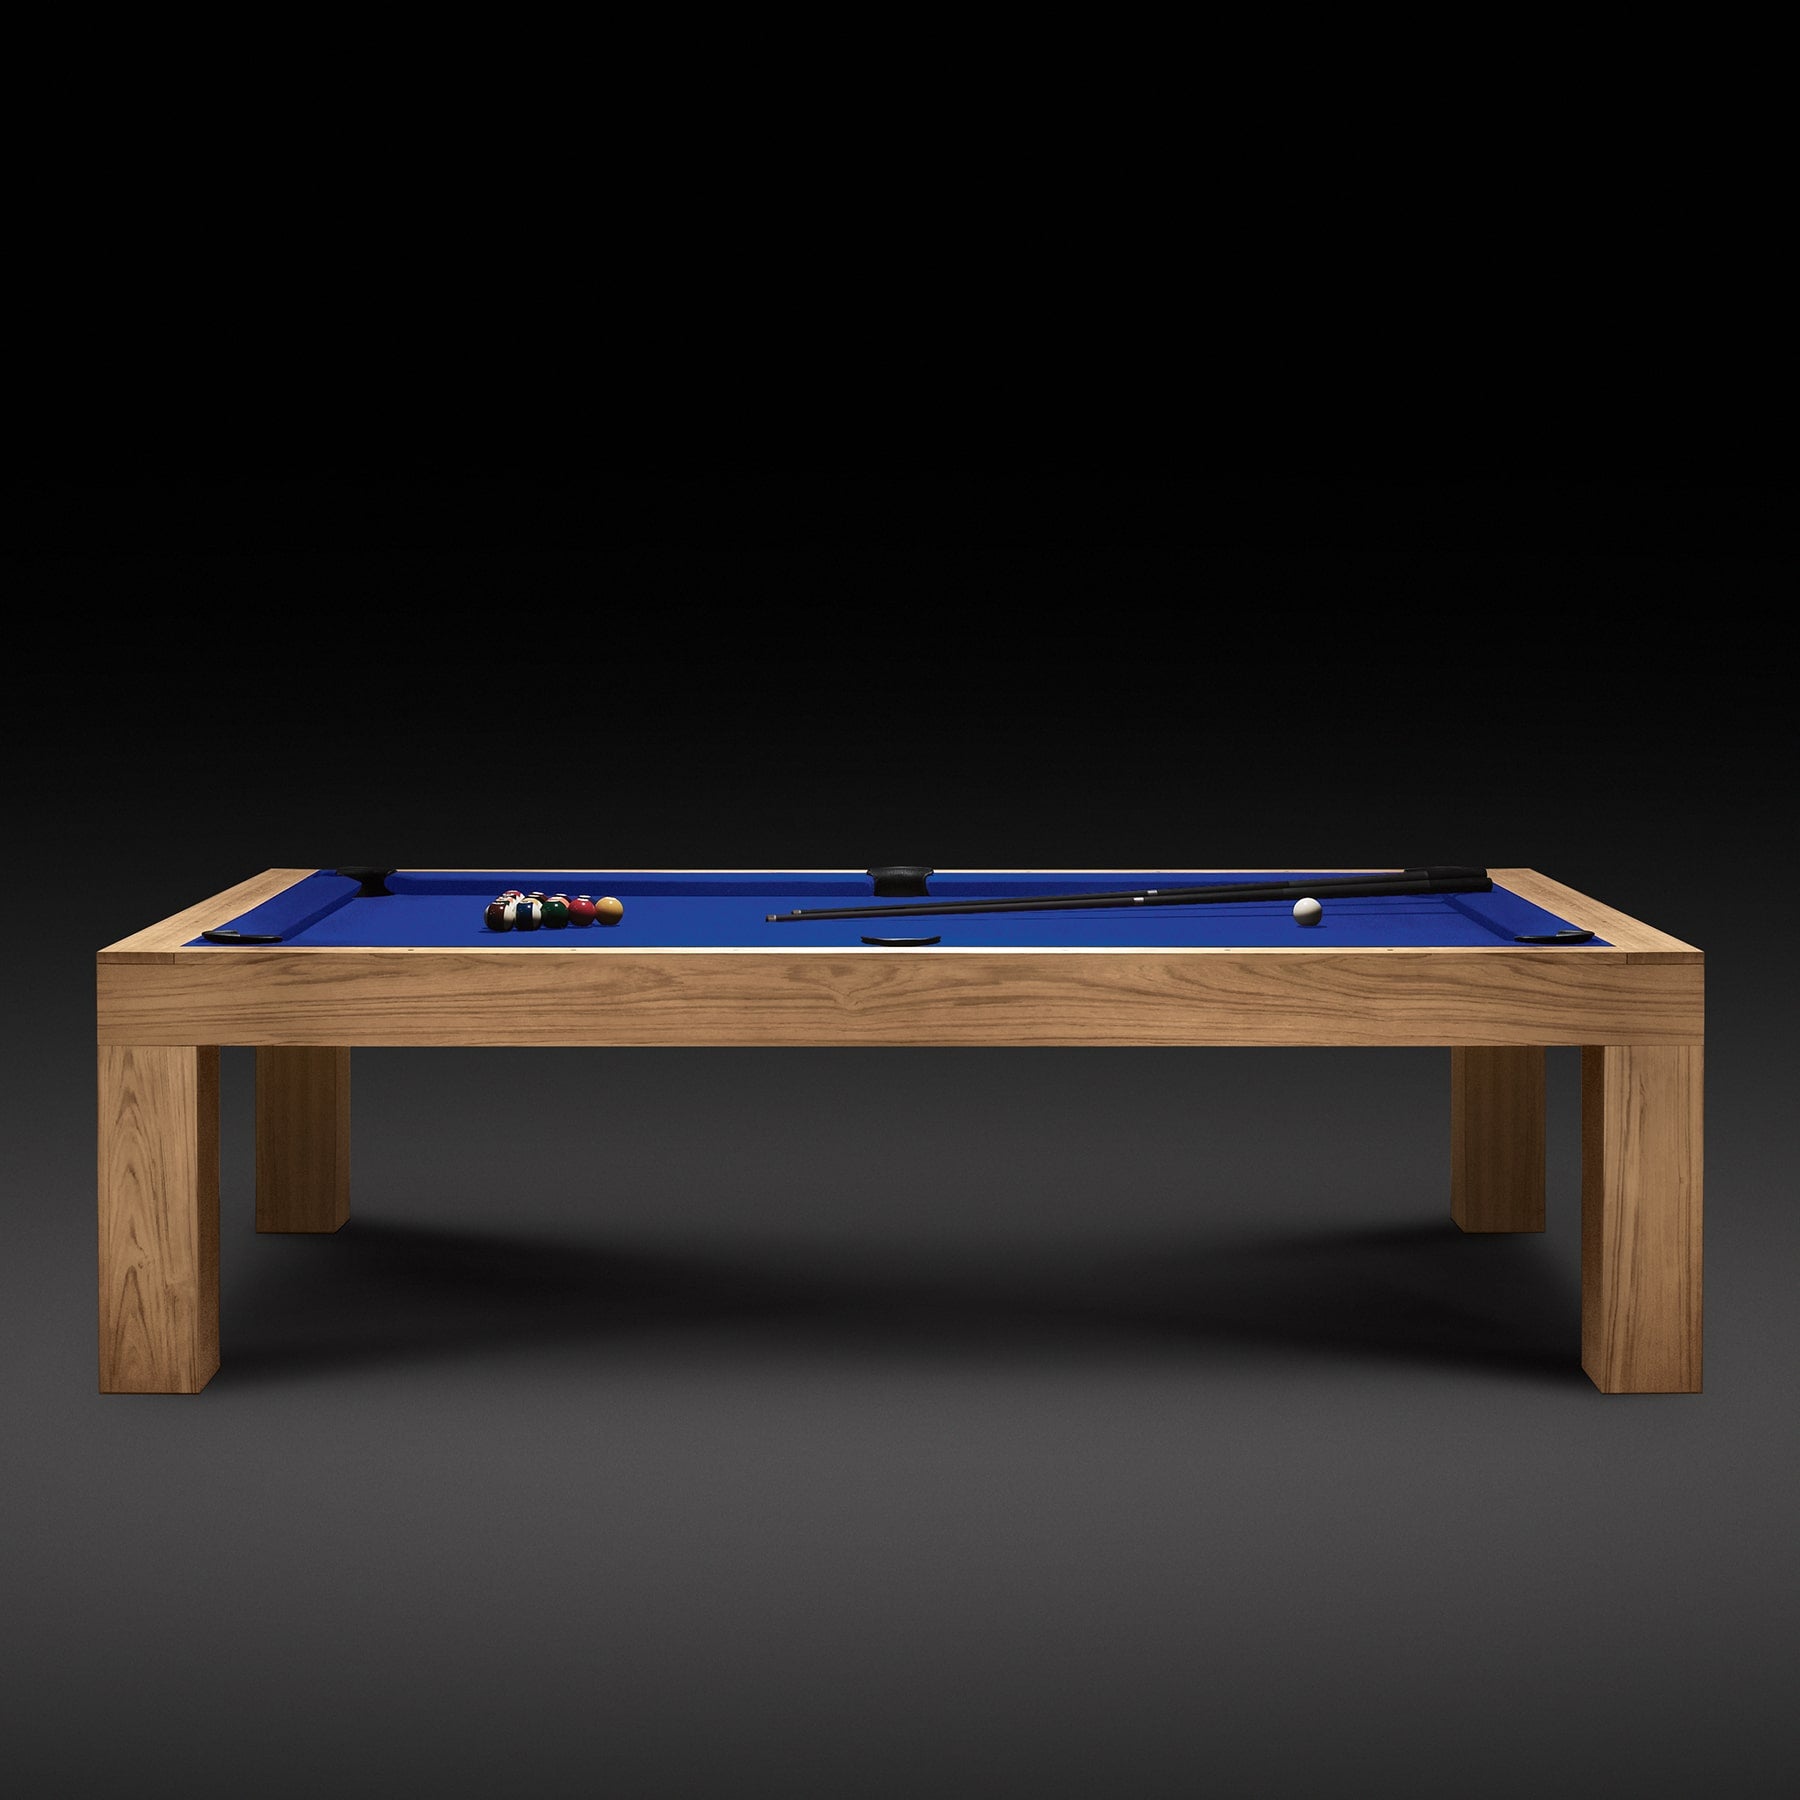 Limited Edition Pool Table - Electric Blue | James Perse Los Angeles